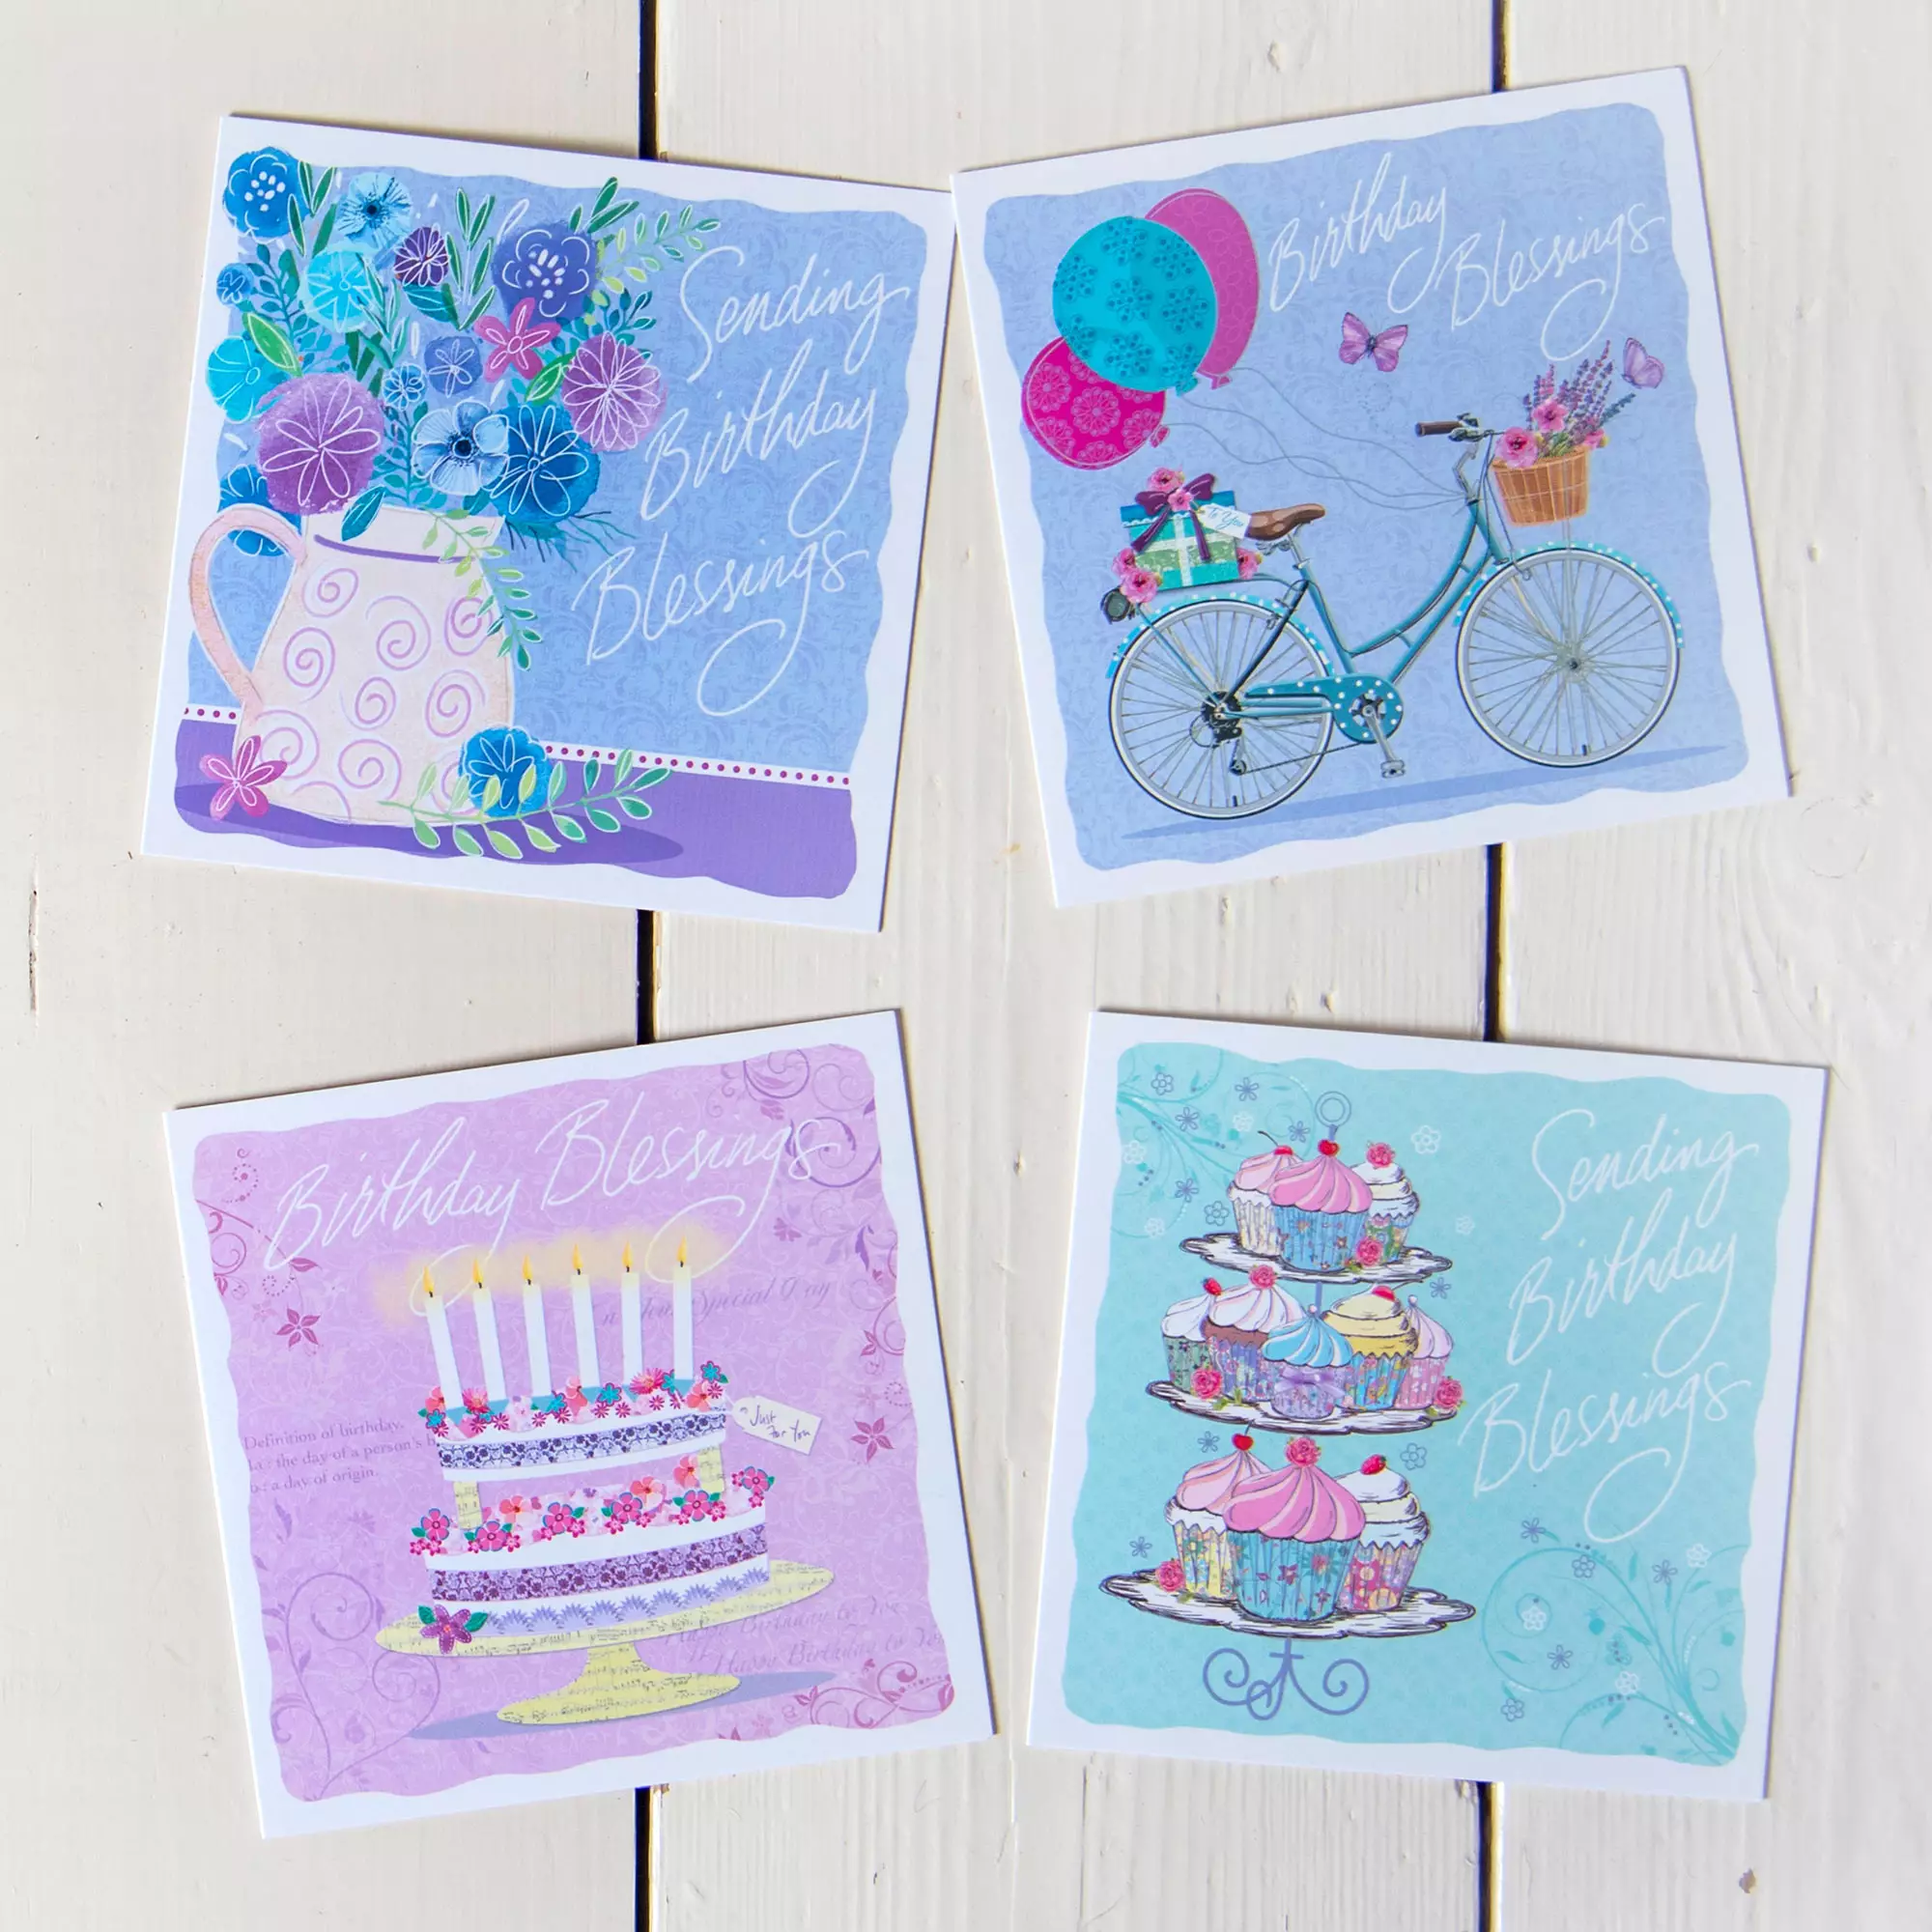 4 Birthday Blessings Cards